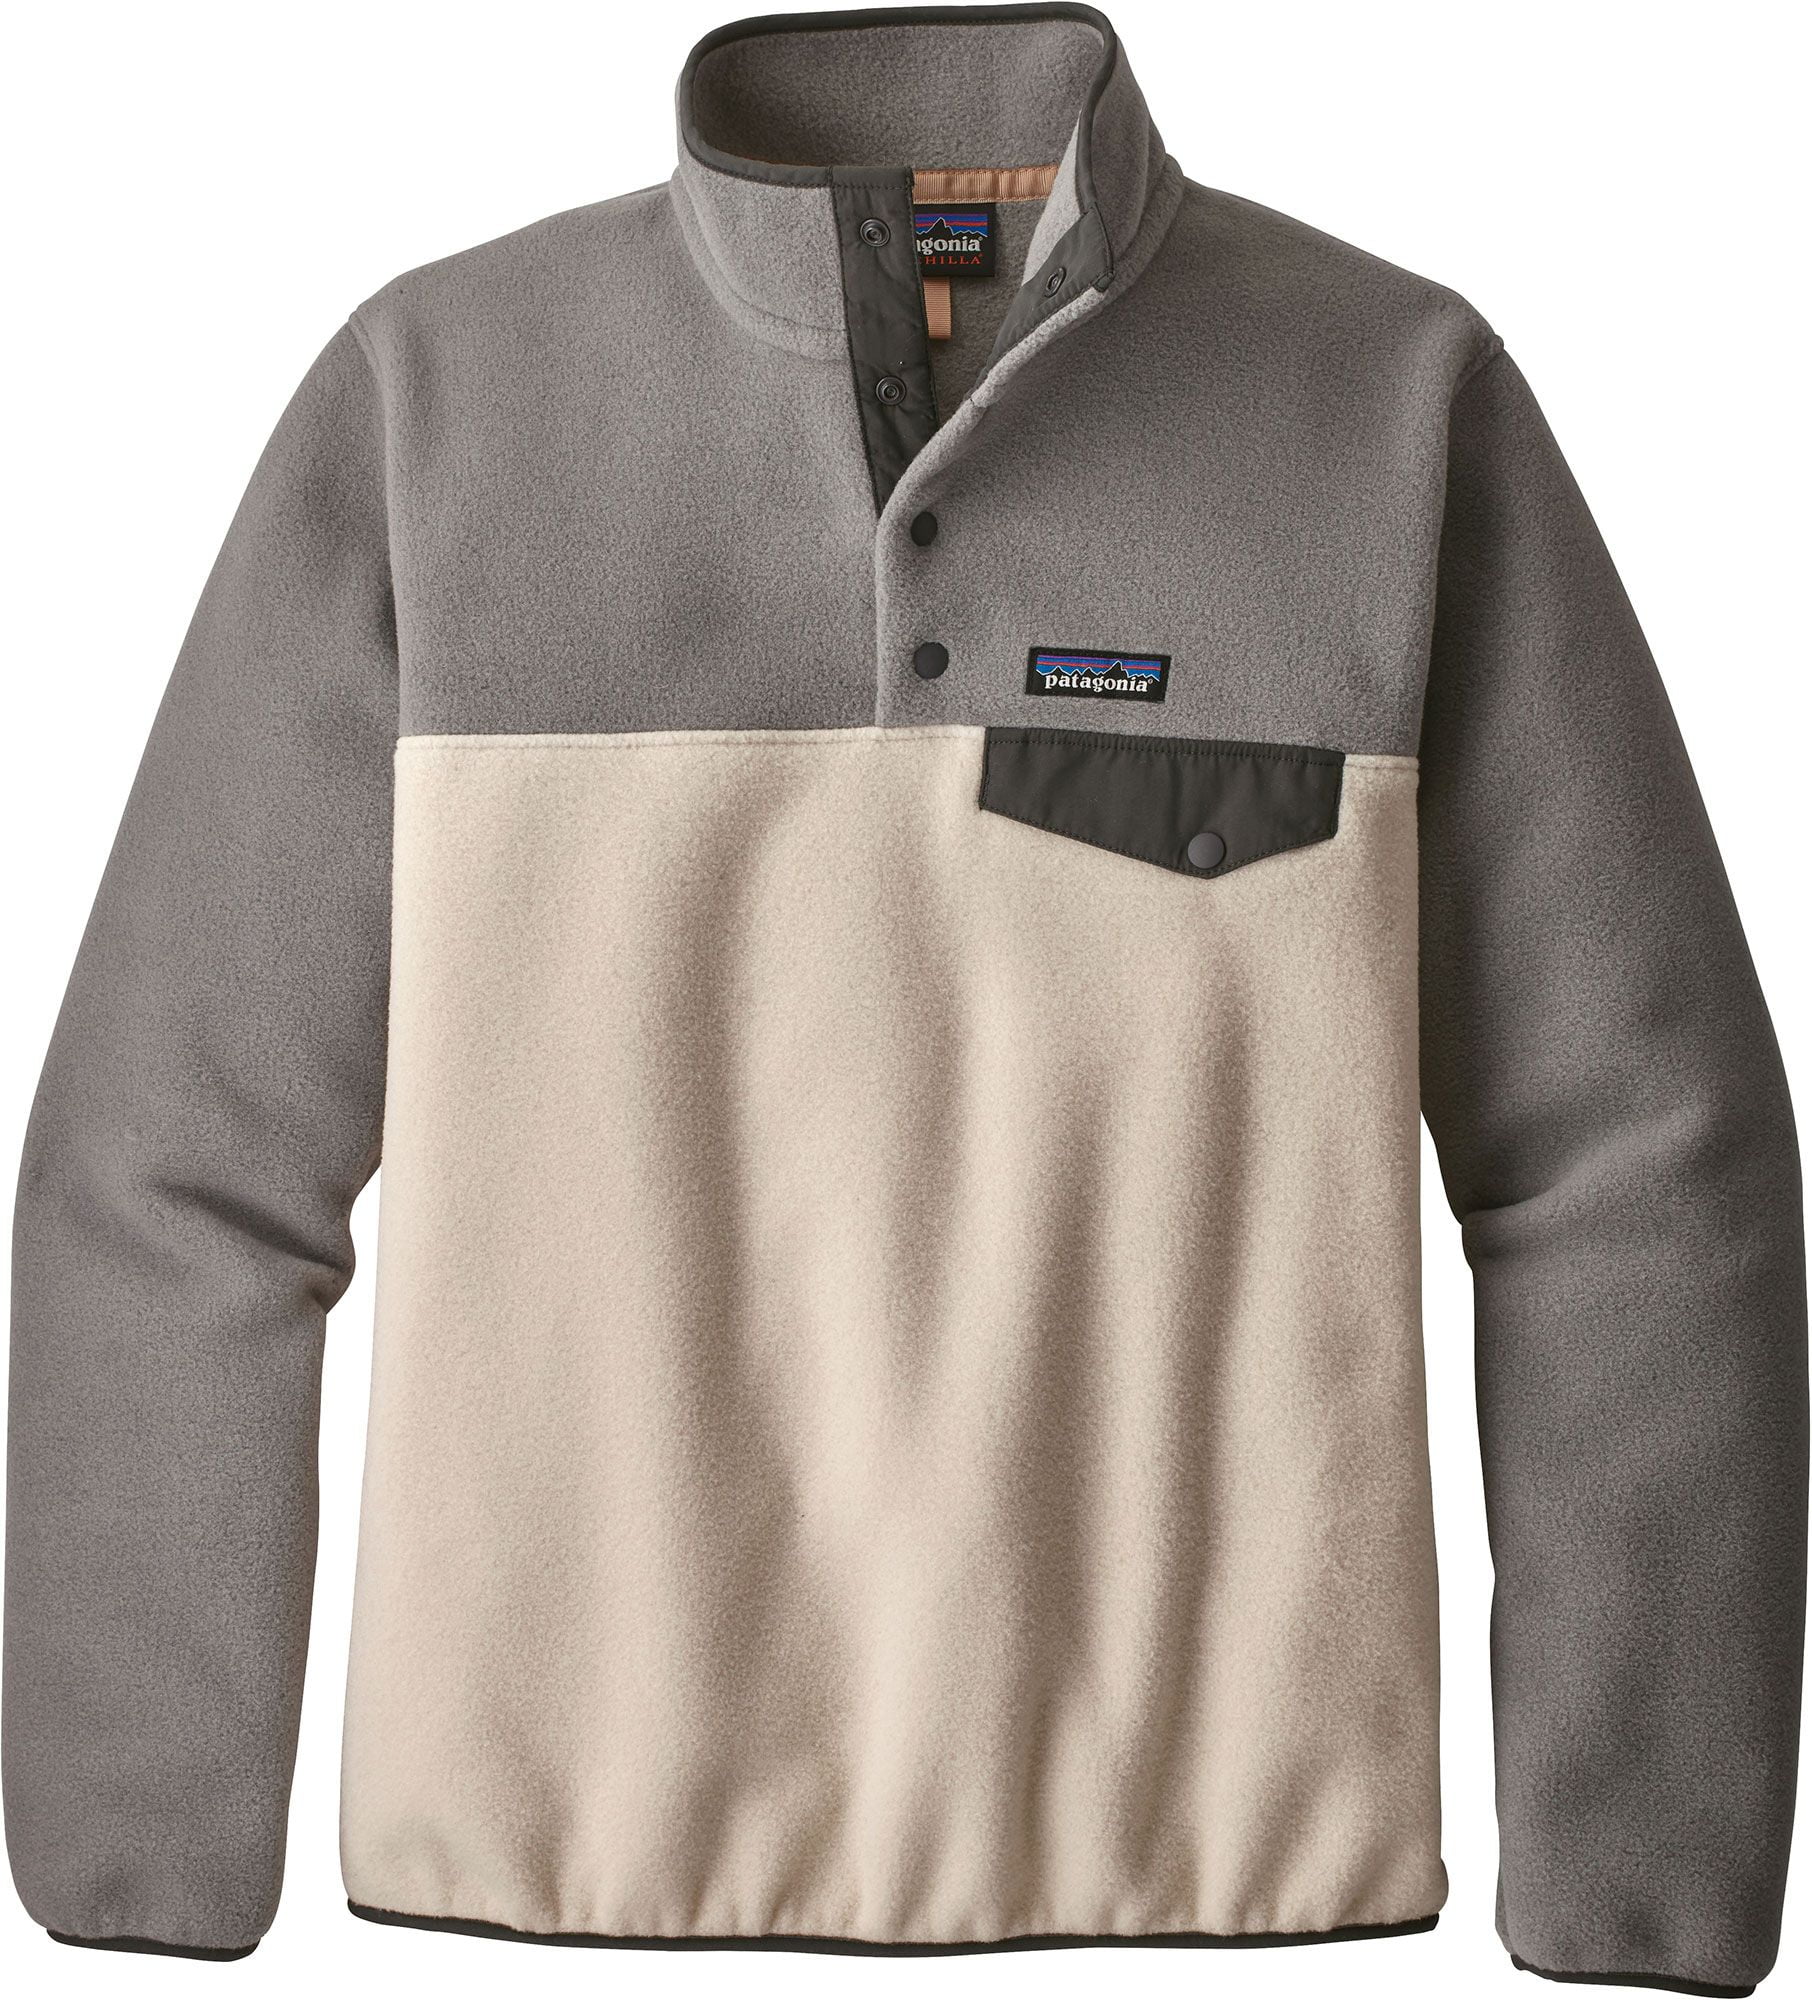 Patagonia - Patagonia Women's Synchilla Snap-T Fleece Pullover